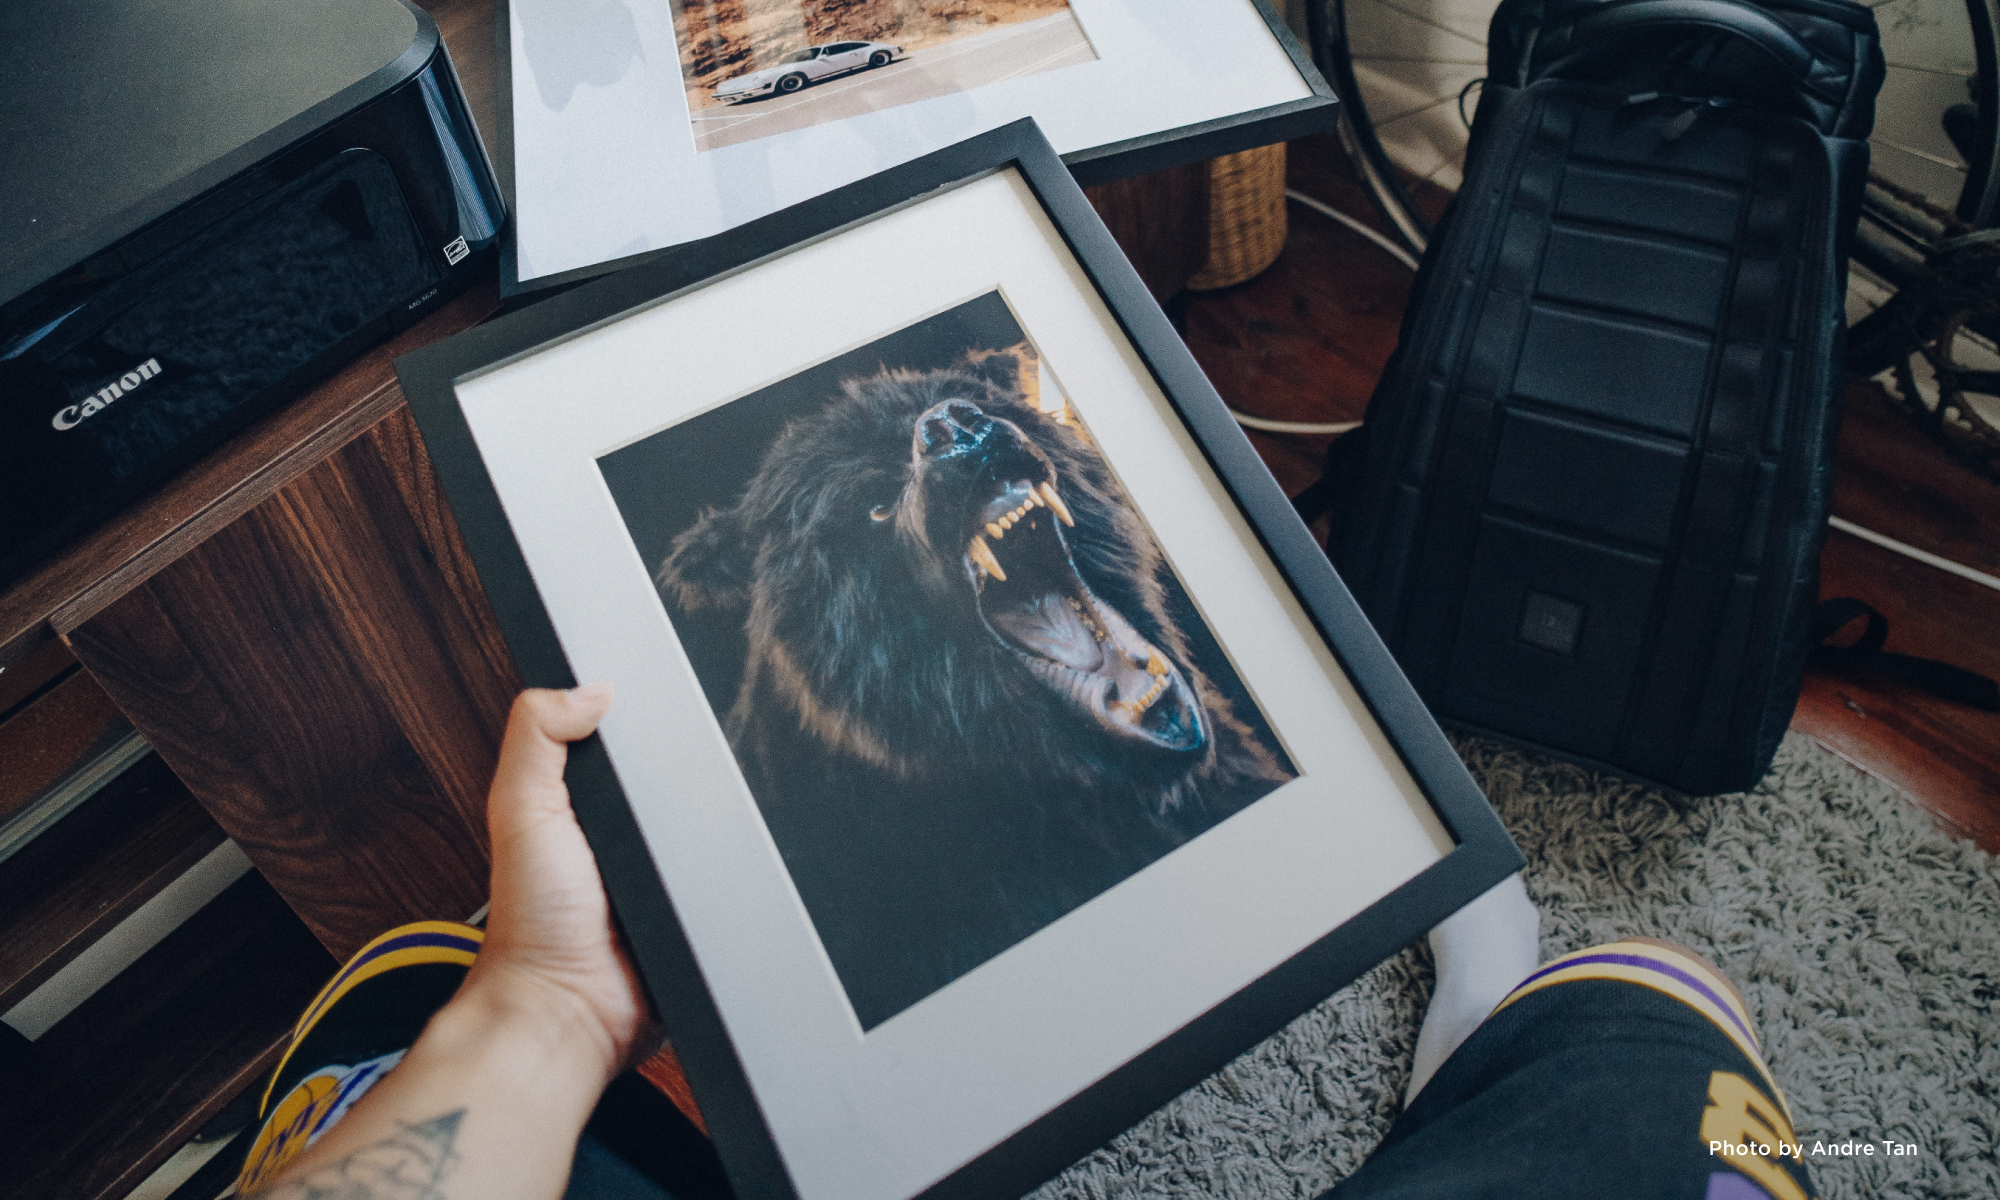 Hand holding a framed photo of a roaring bear.